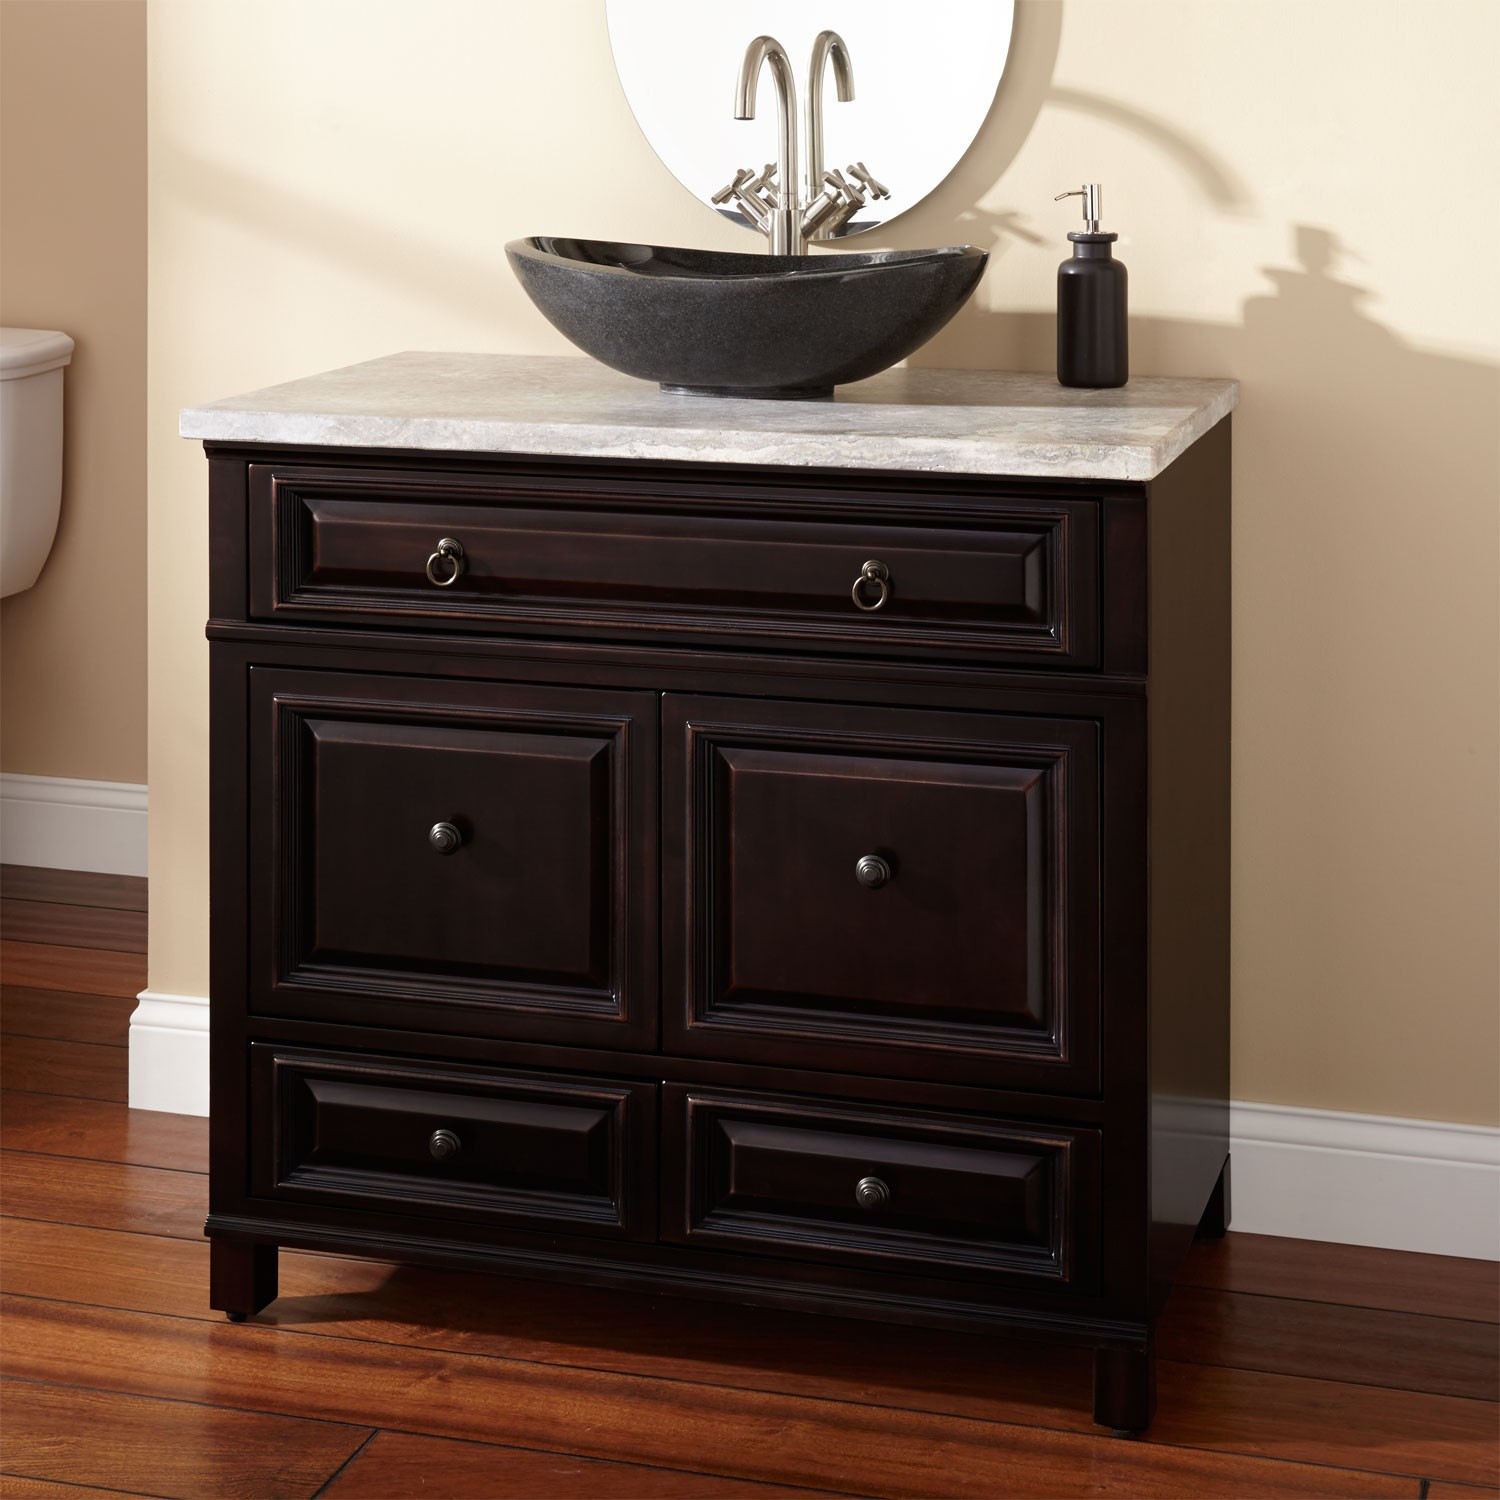 Home Depot Bathroom Vanity Clearance
 Bathroom Alluring Style Lowes Bath Vanities For Your